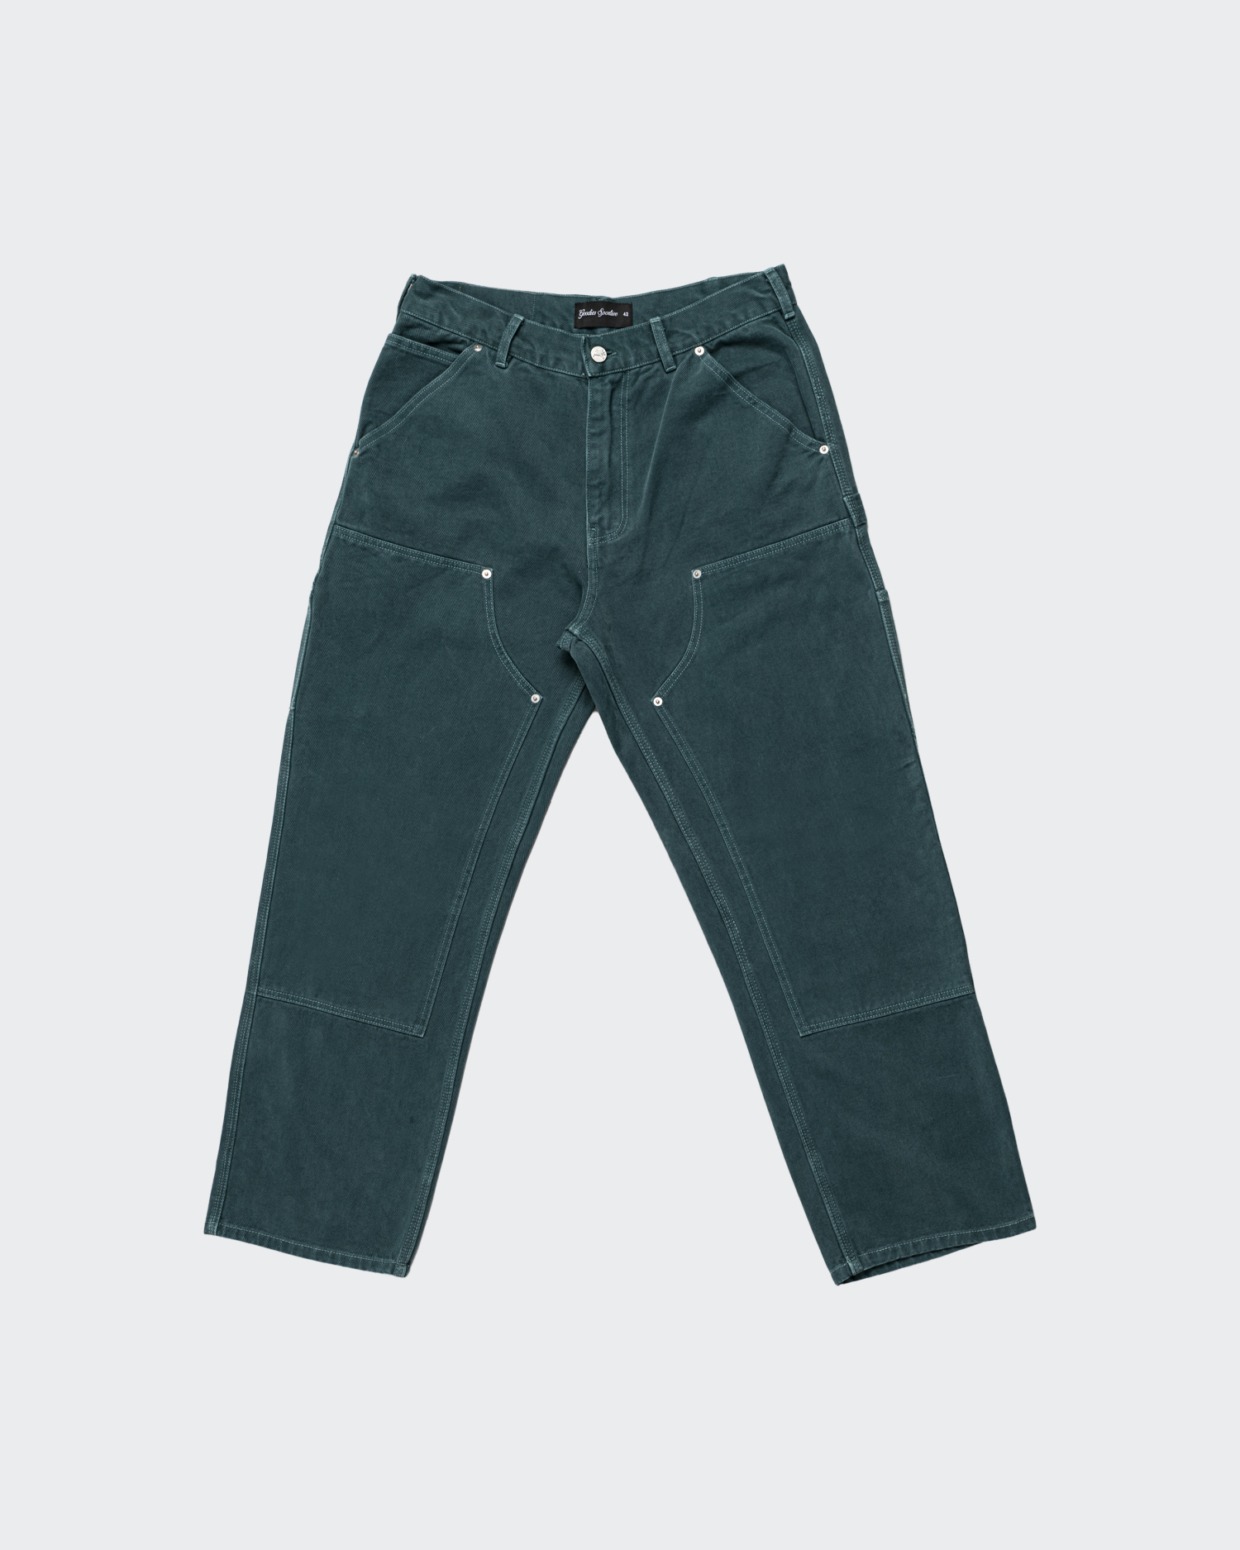 Goodies Sportive Carpenter Washed Pants